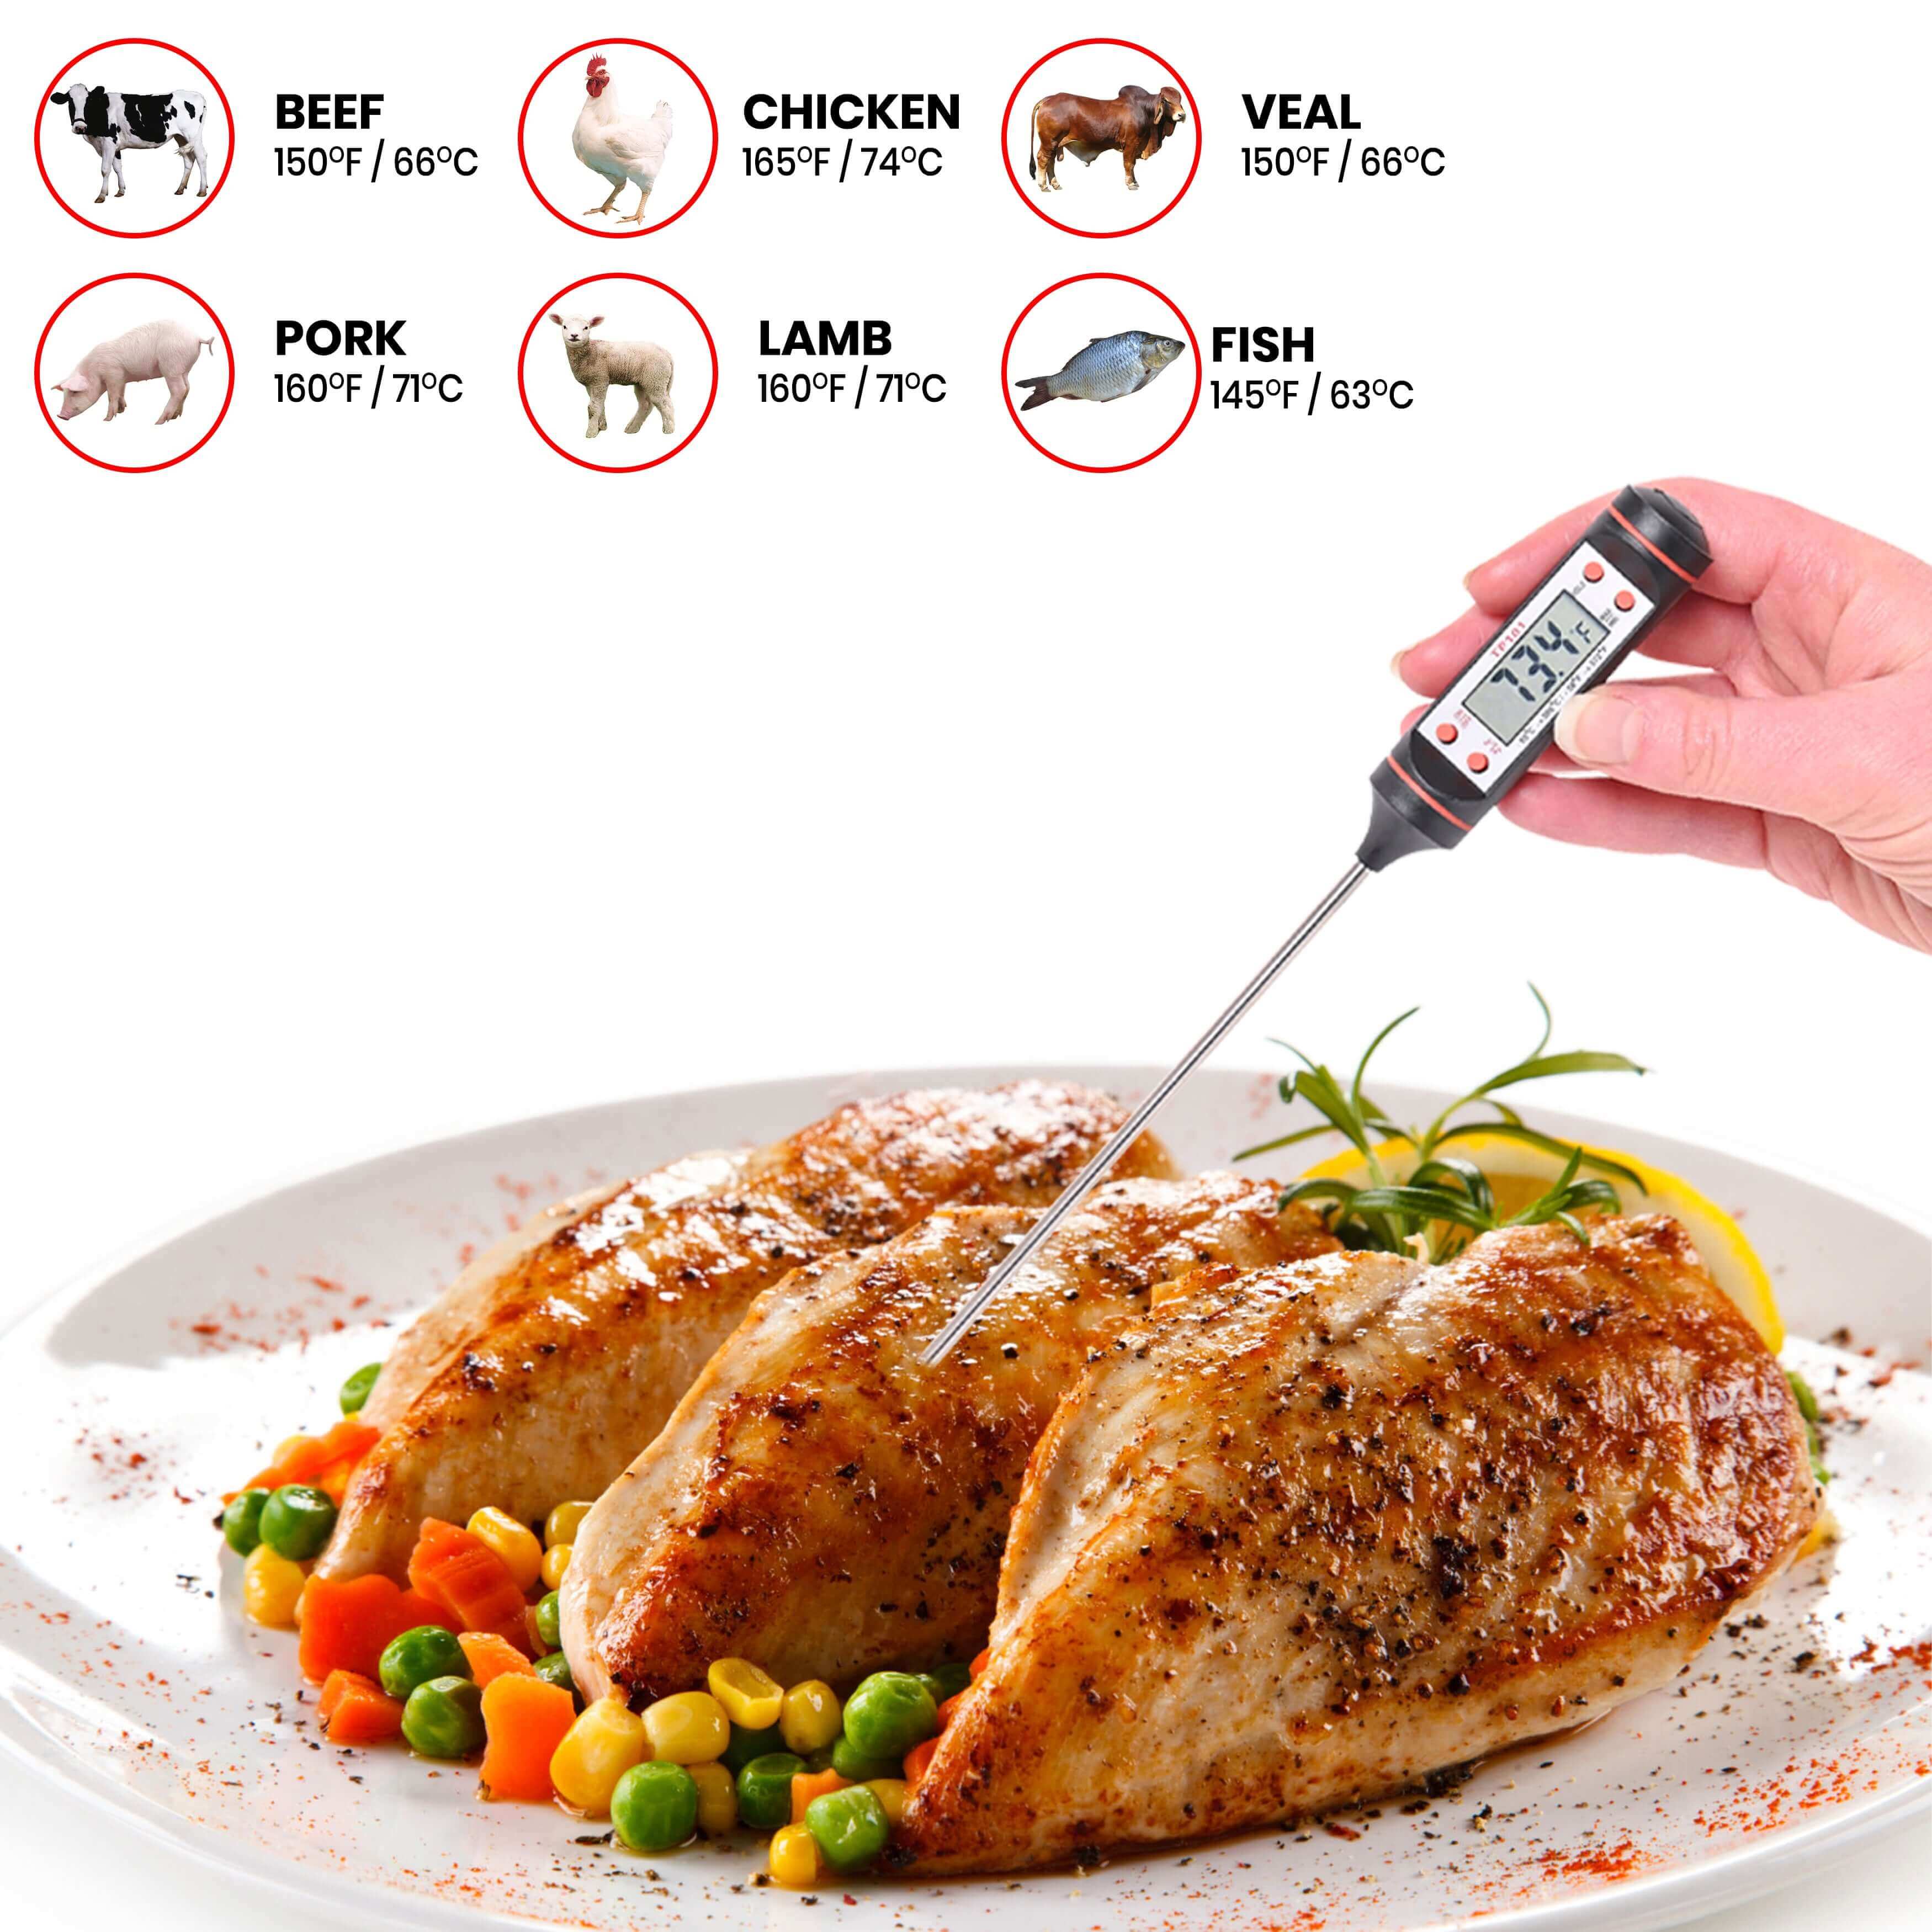 https://cdn.shopify.com/s/files/1/2091/6511/products/cheer-collection-digital-meat-thermometer-quick-read-cooking-thermometer-for-grill-bbq-snoker-and-kitchen-729803.jpg?v=1672303894